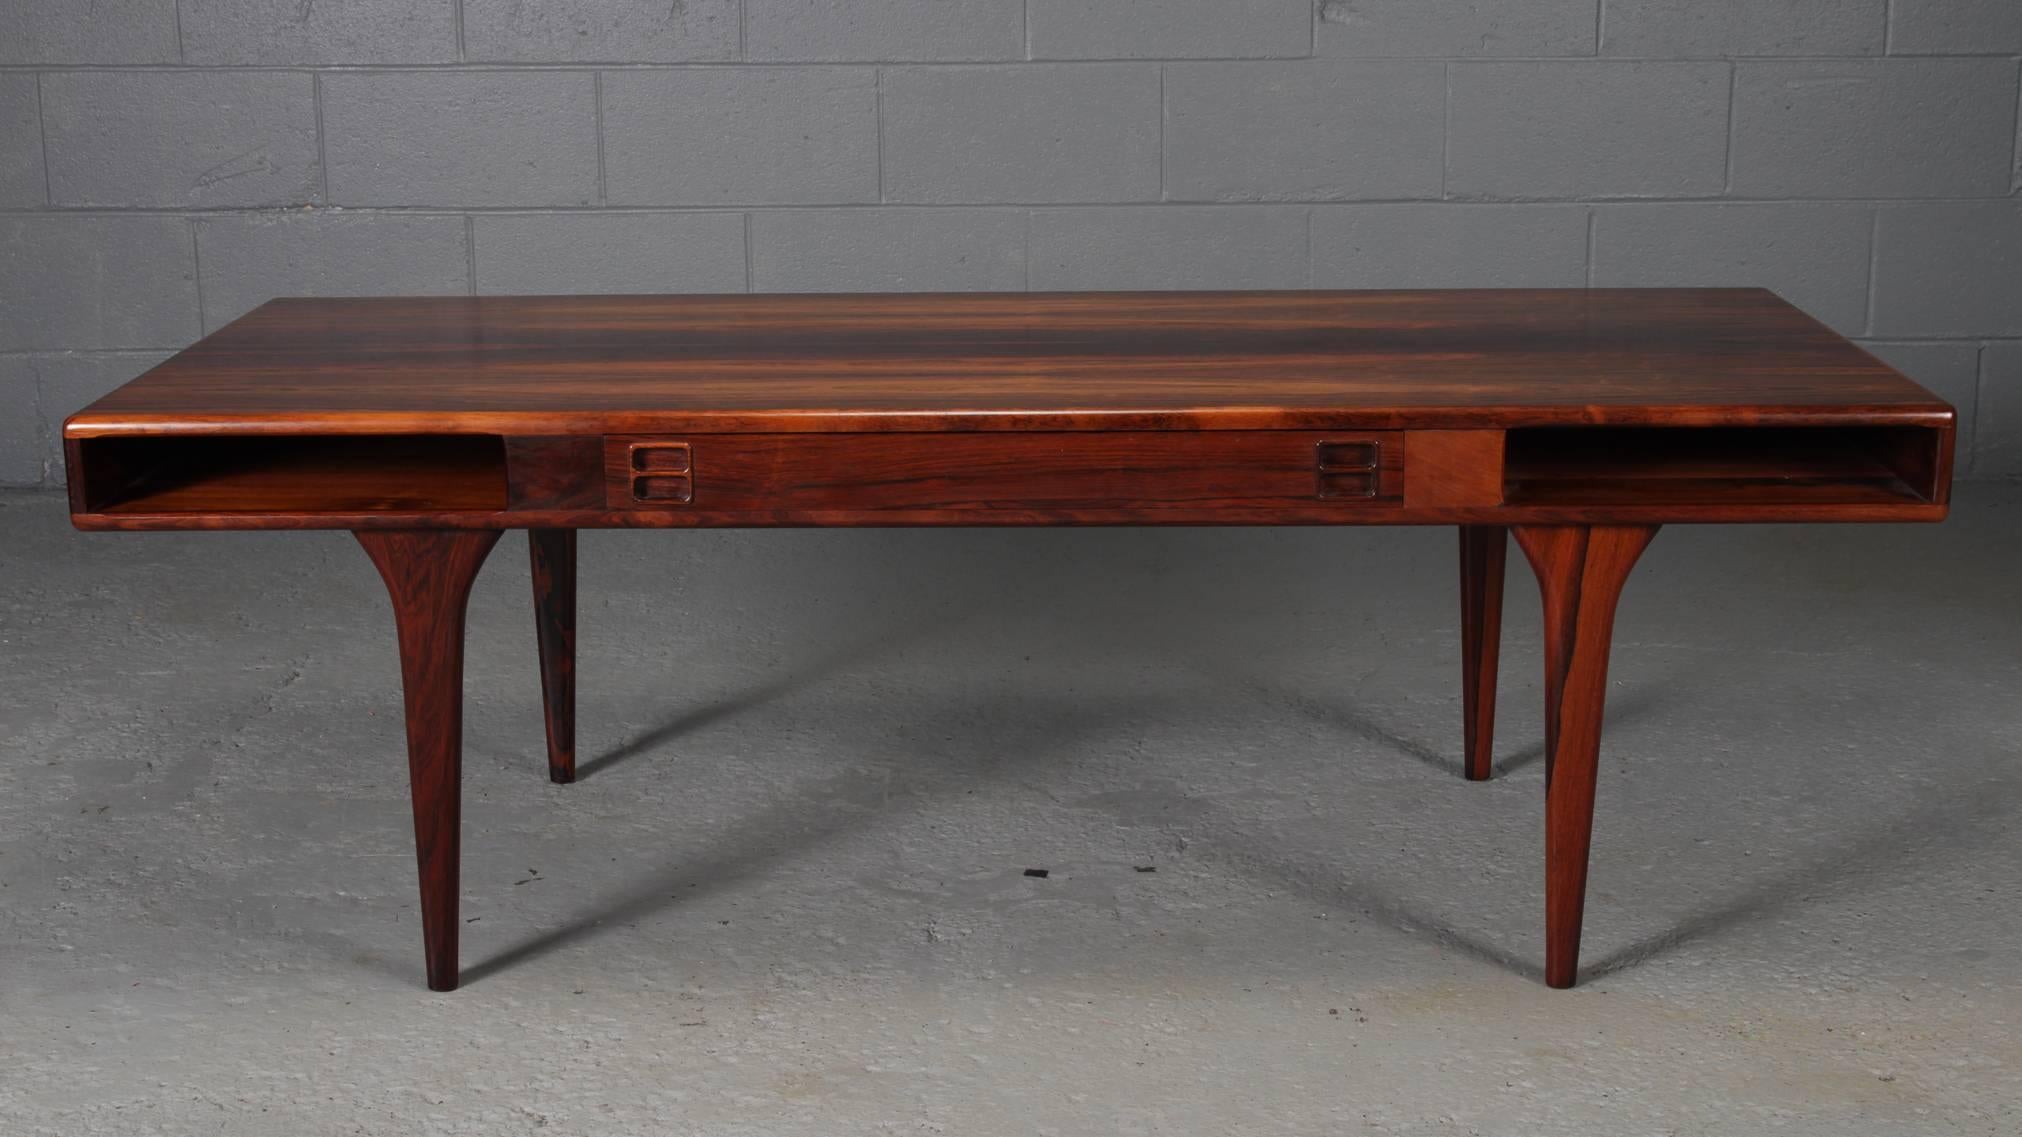 Rare Danish rosewood coffee table by Jorgen and Nanna Ditzel. Drawers on either side.